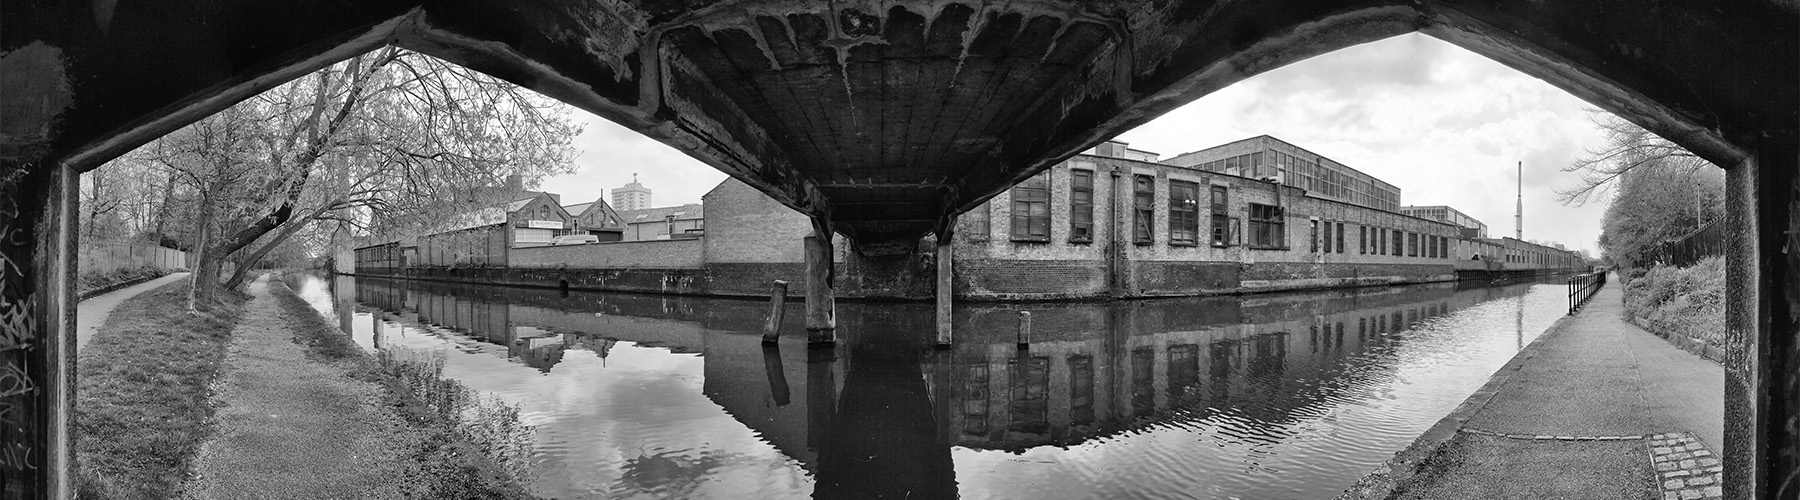 Industrial landscape - canal in Leicester